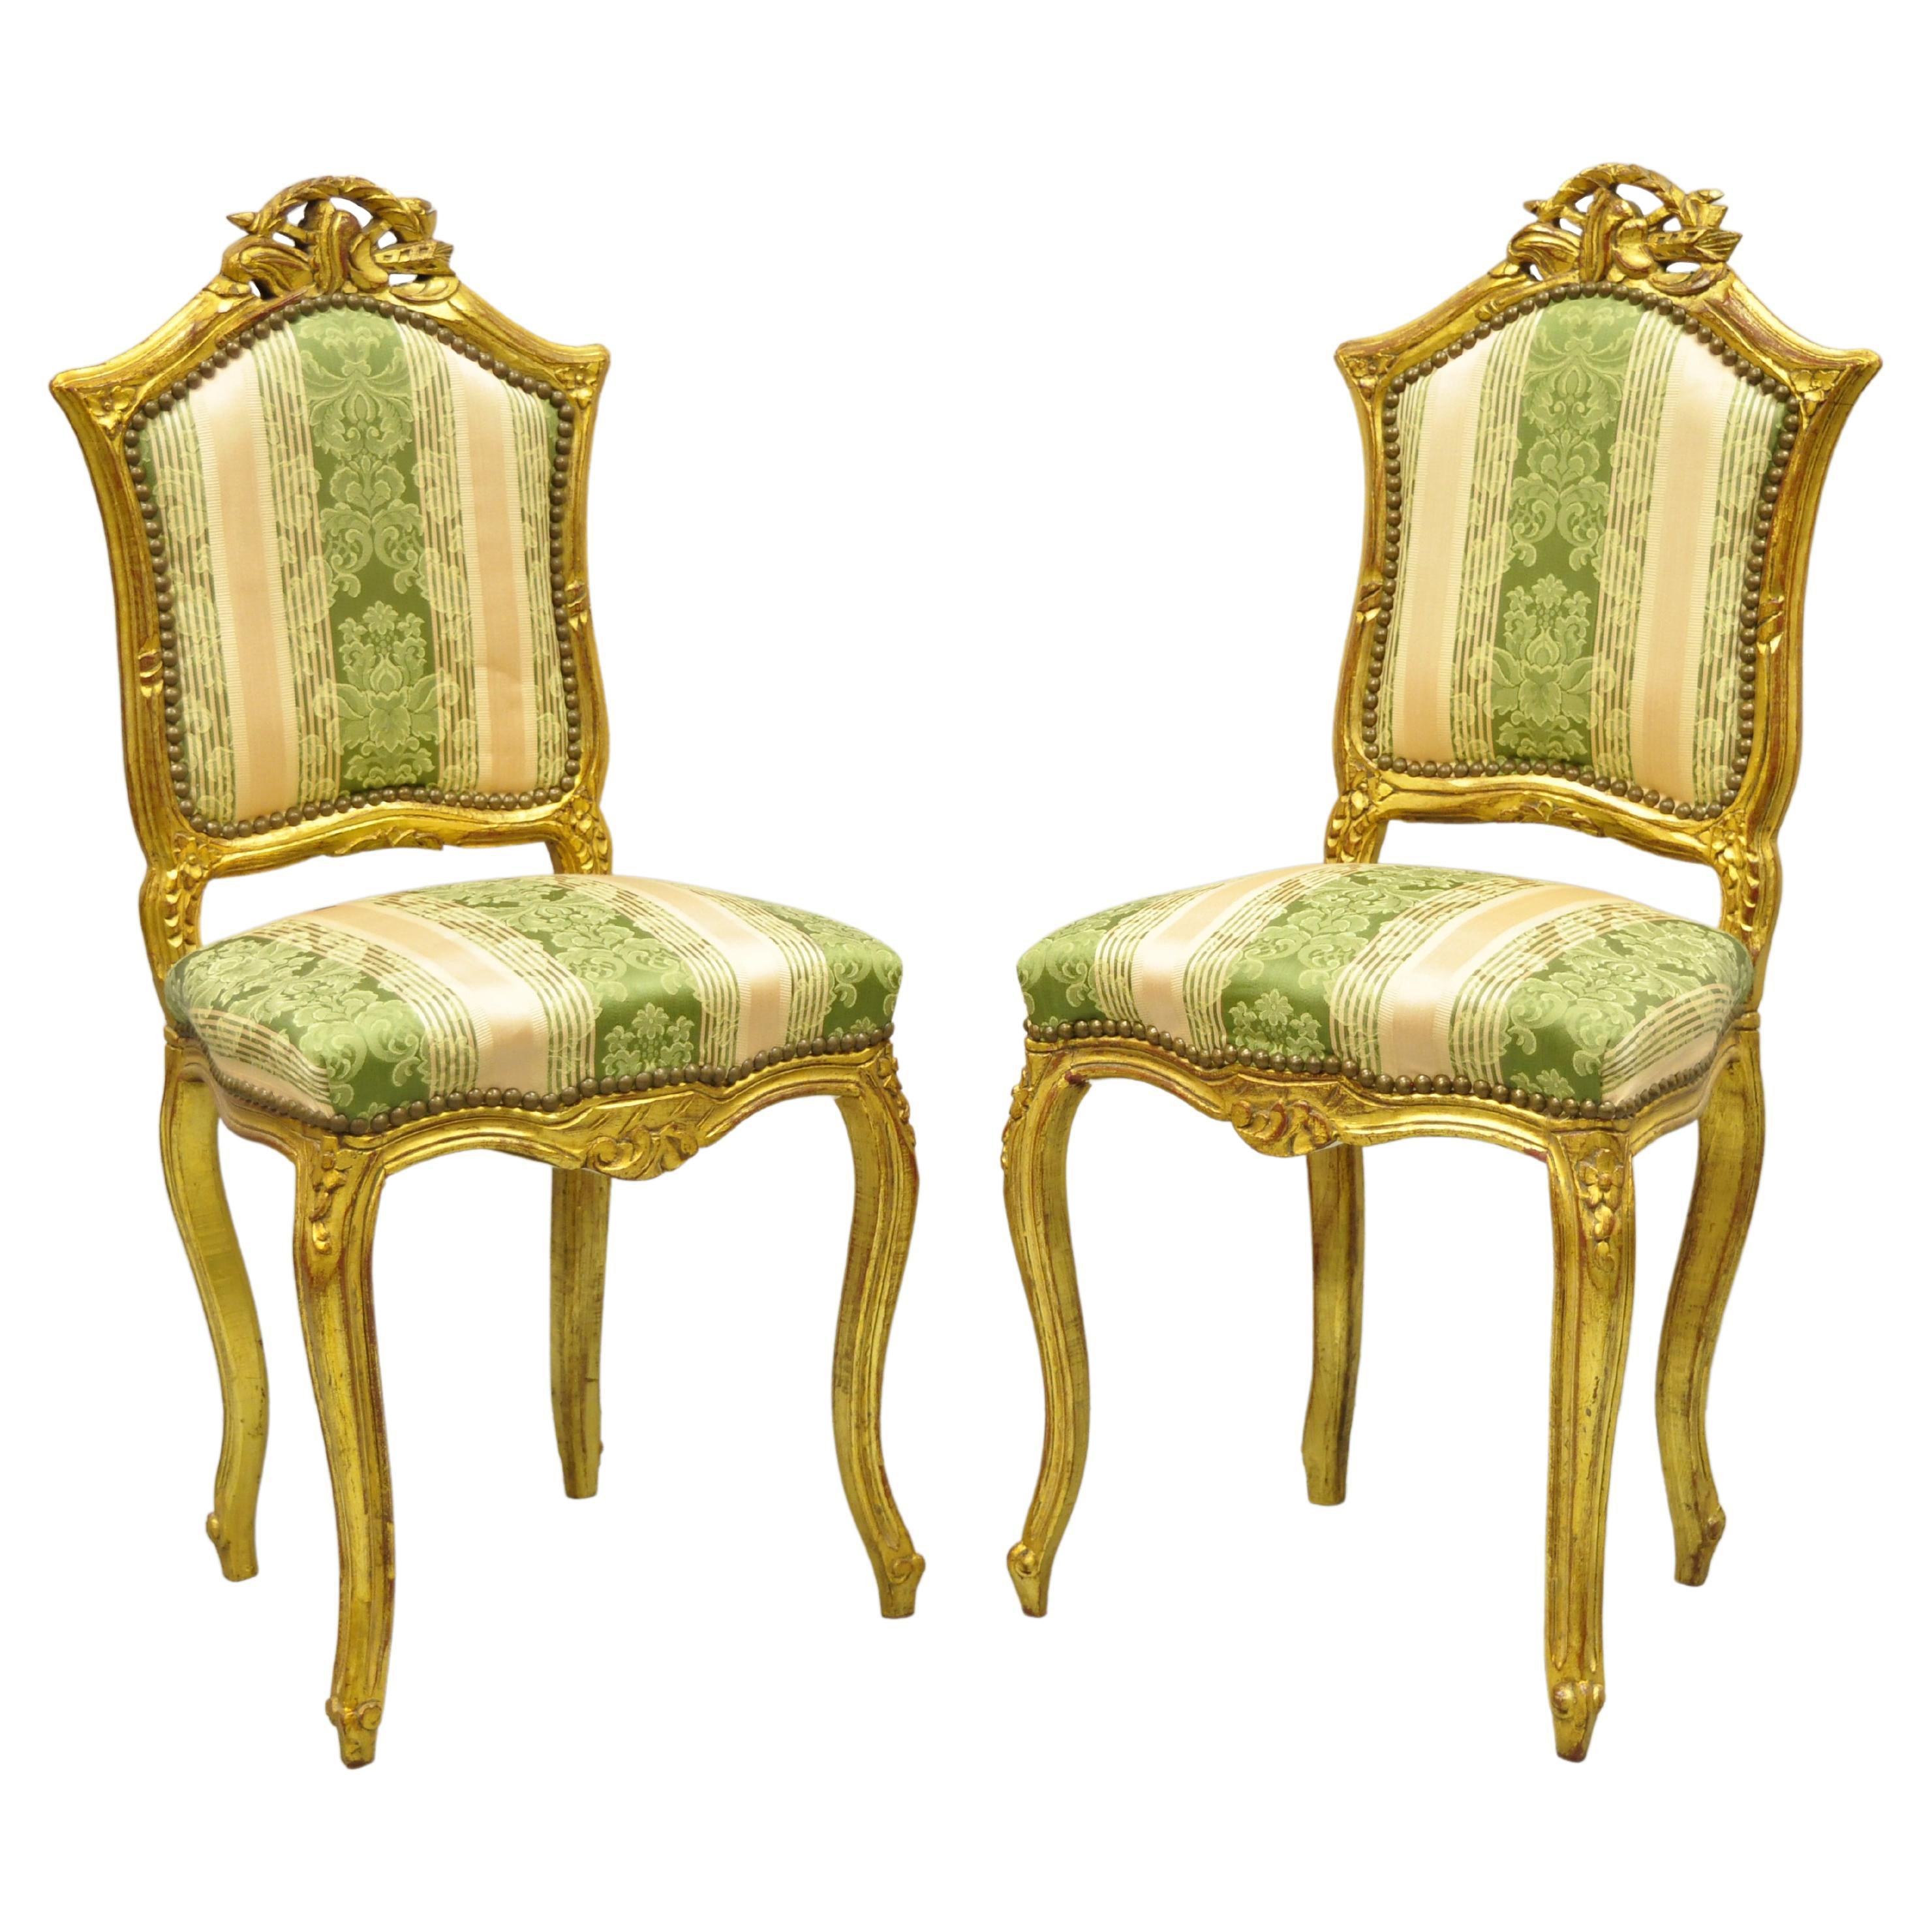 Vintage French Louis XV Style Gold Giltwood Carved Boudoir Side Chairs, a Pair For Sale